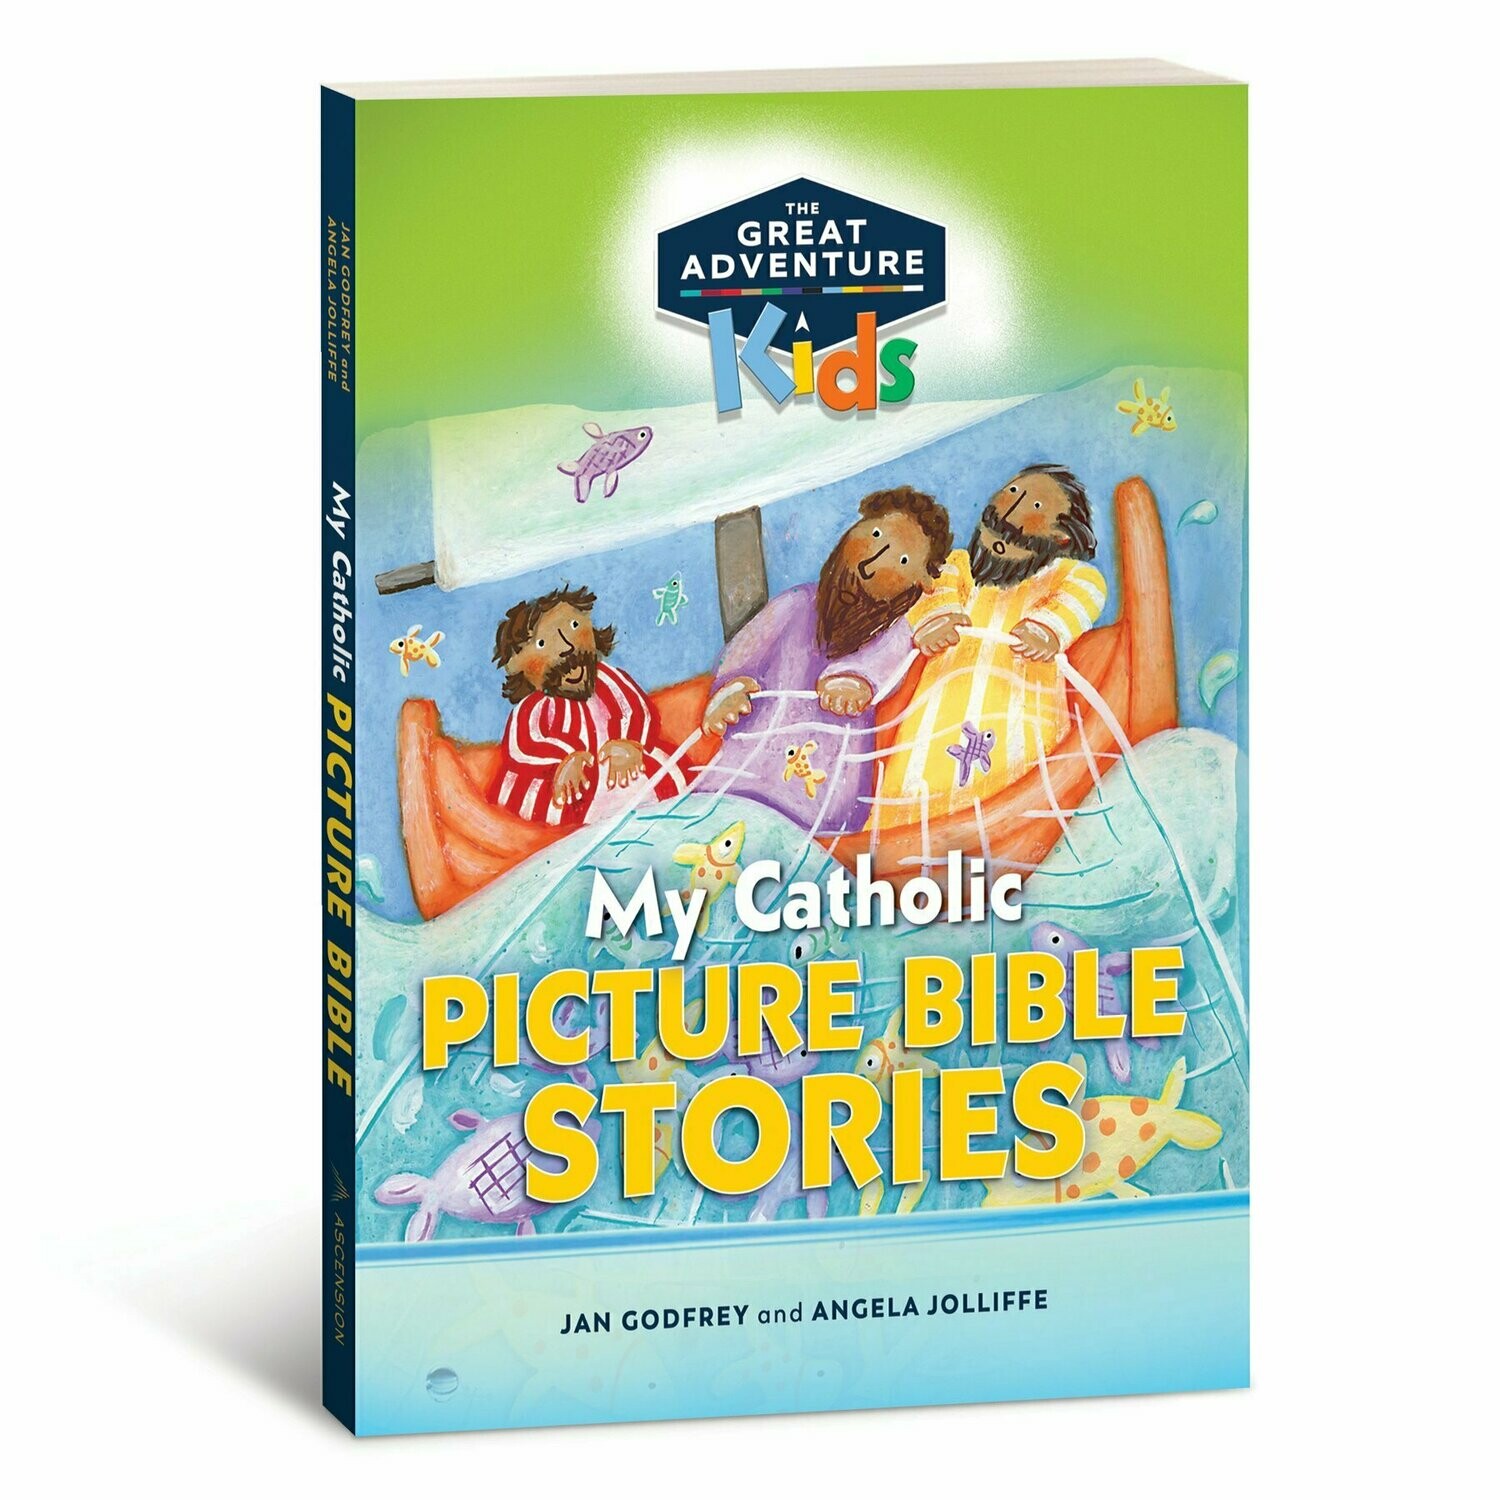 Adventure Kids: My Catholic Picture Bible Stories